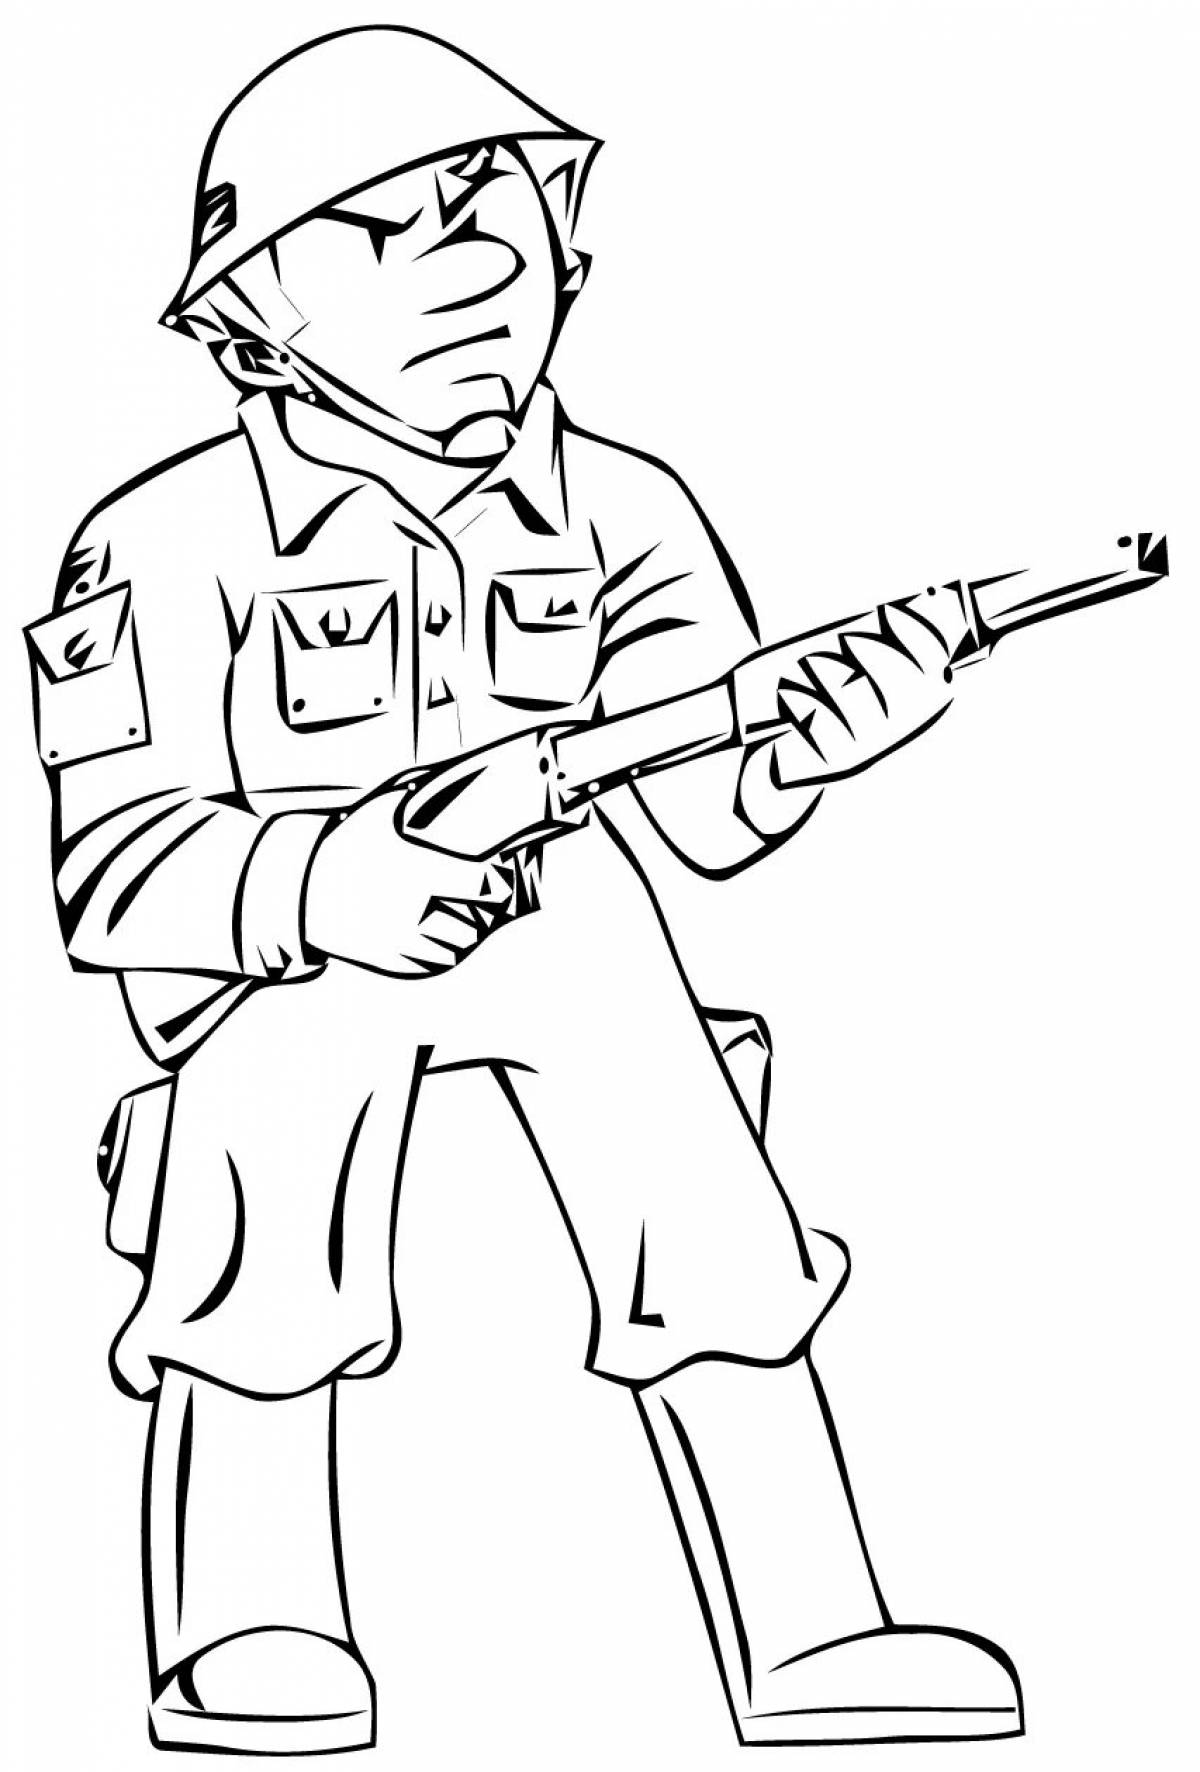 Lilliputian soldier coloring page